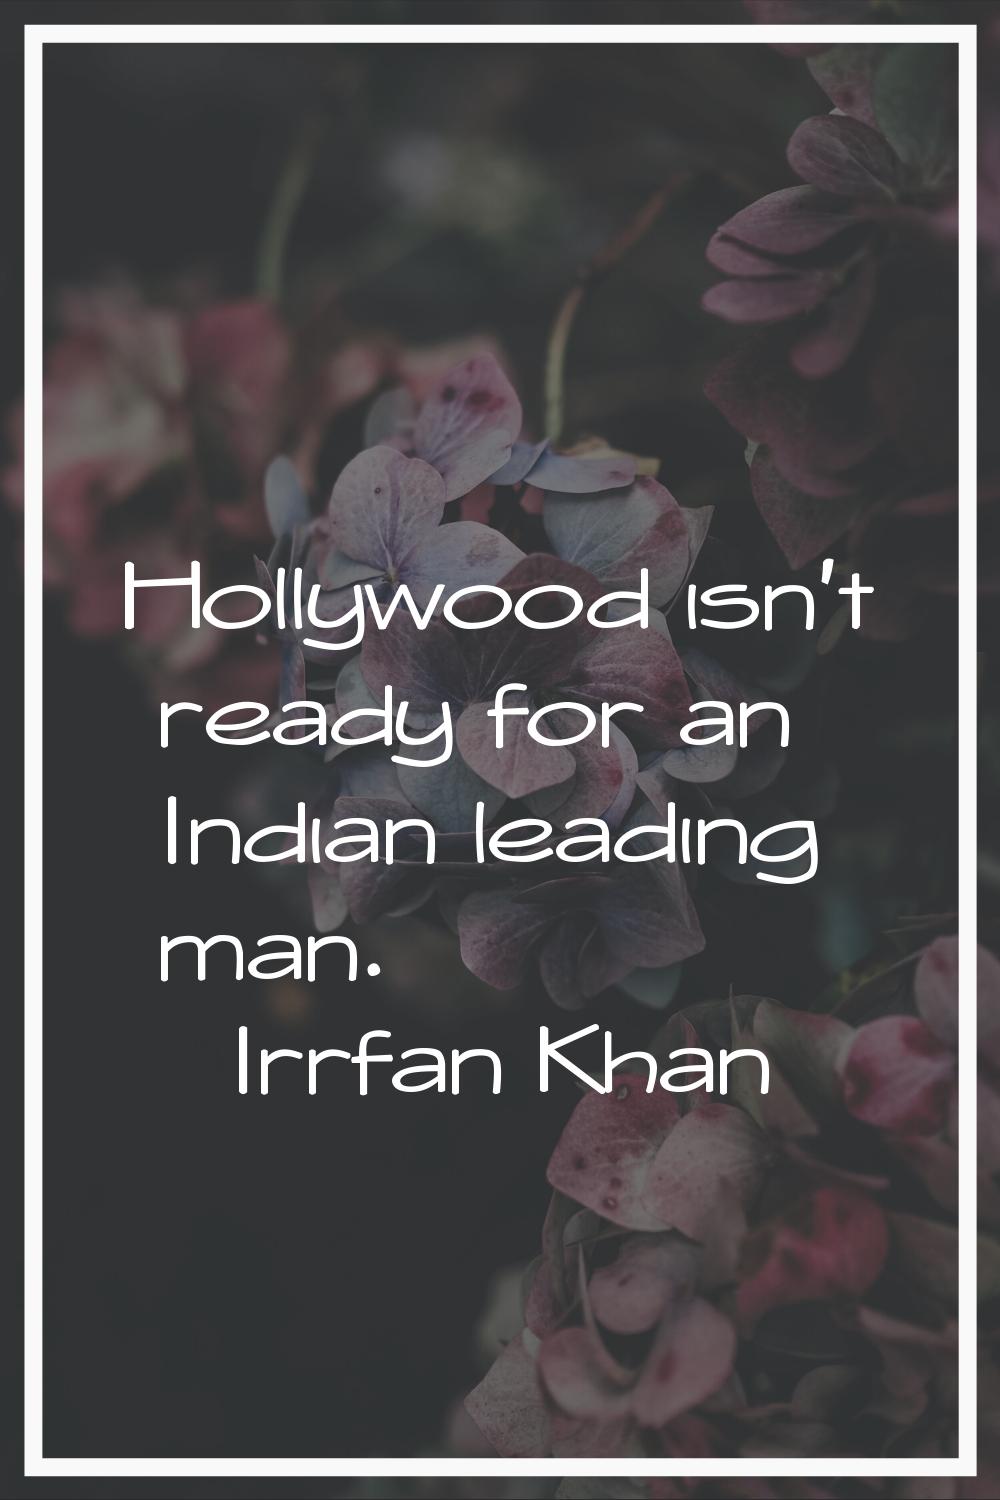 Hollywood isn't ready for an Indian leading man.